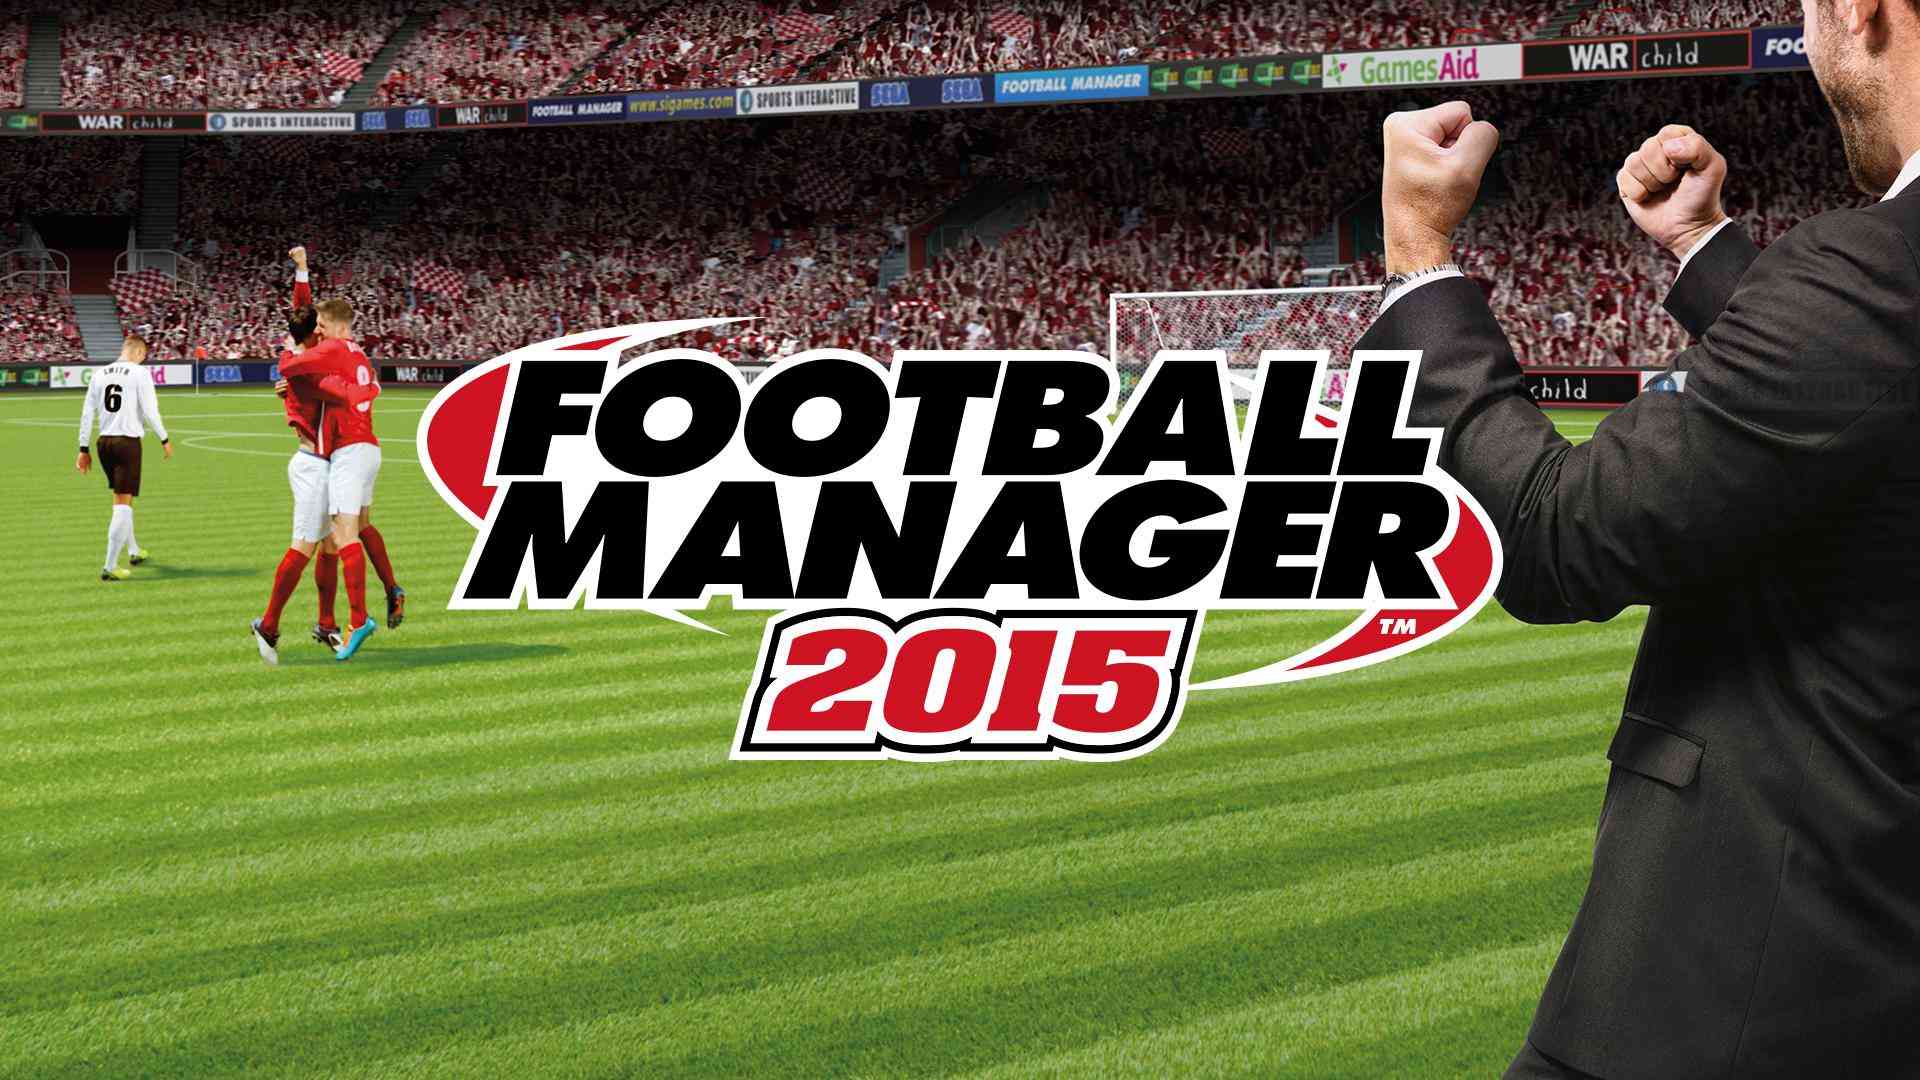 Football Manager 2023 download the last version for windows